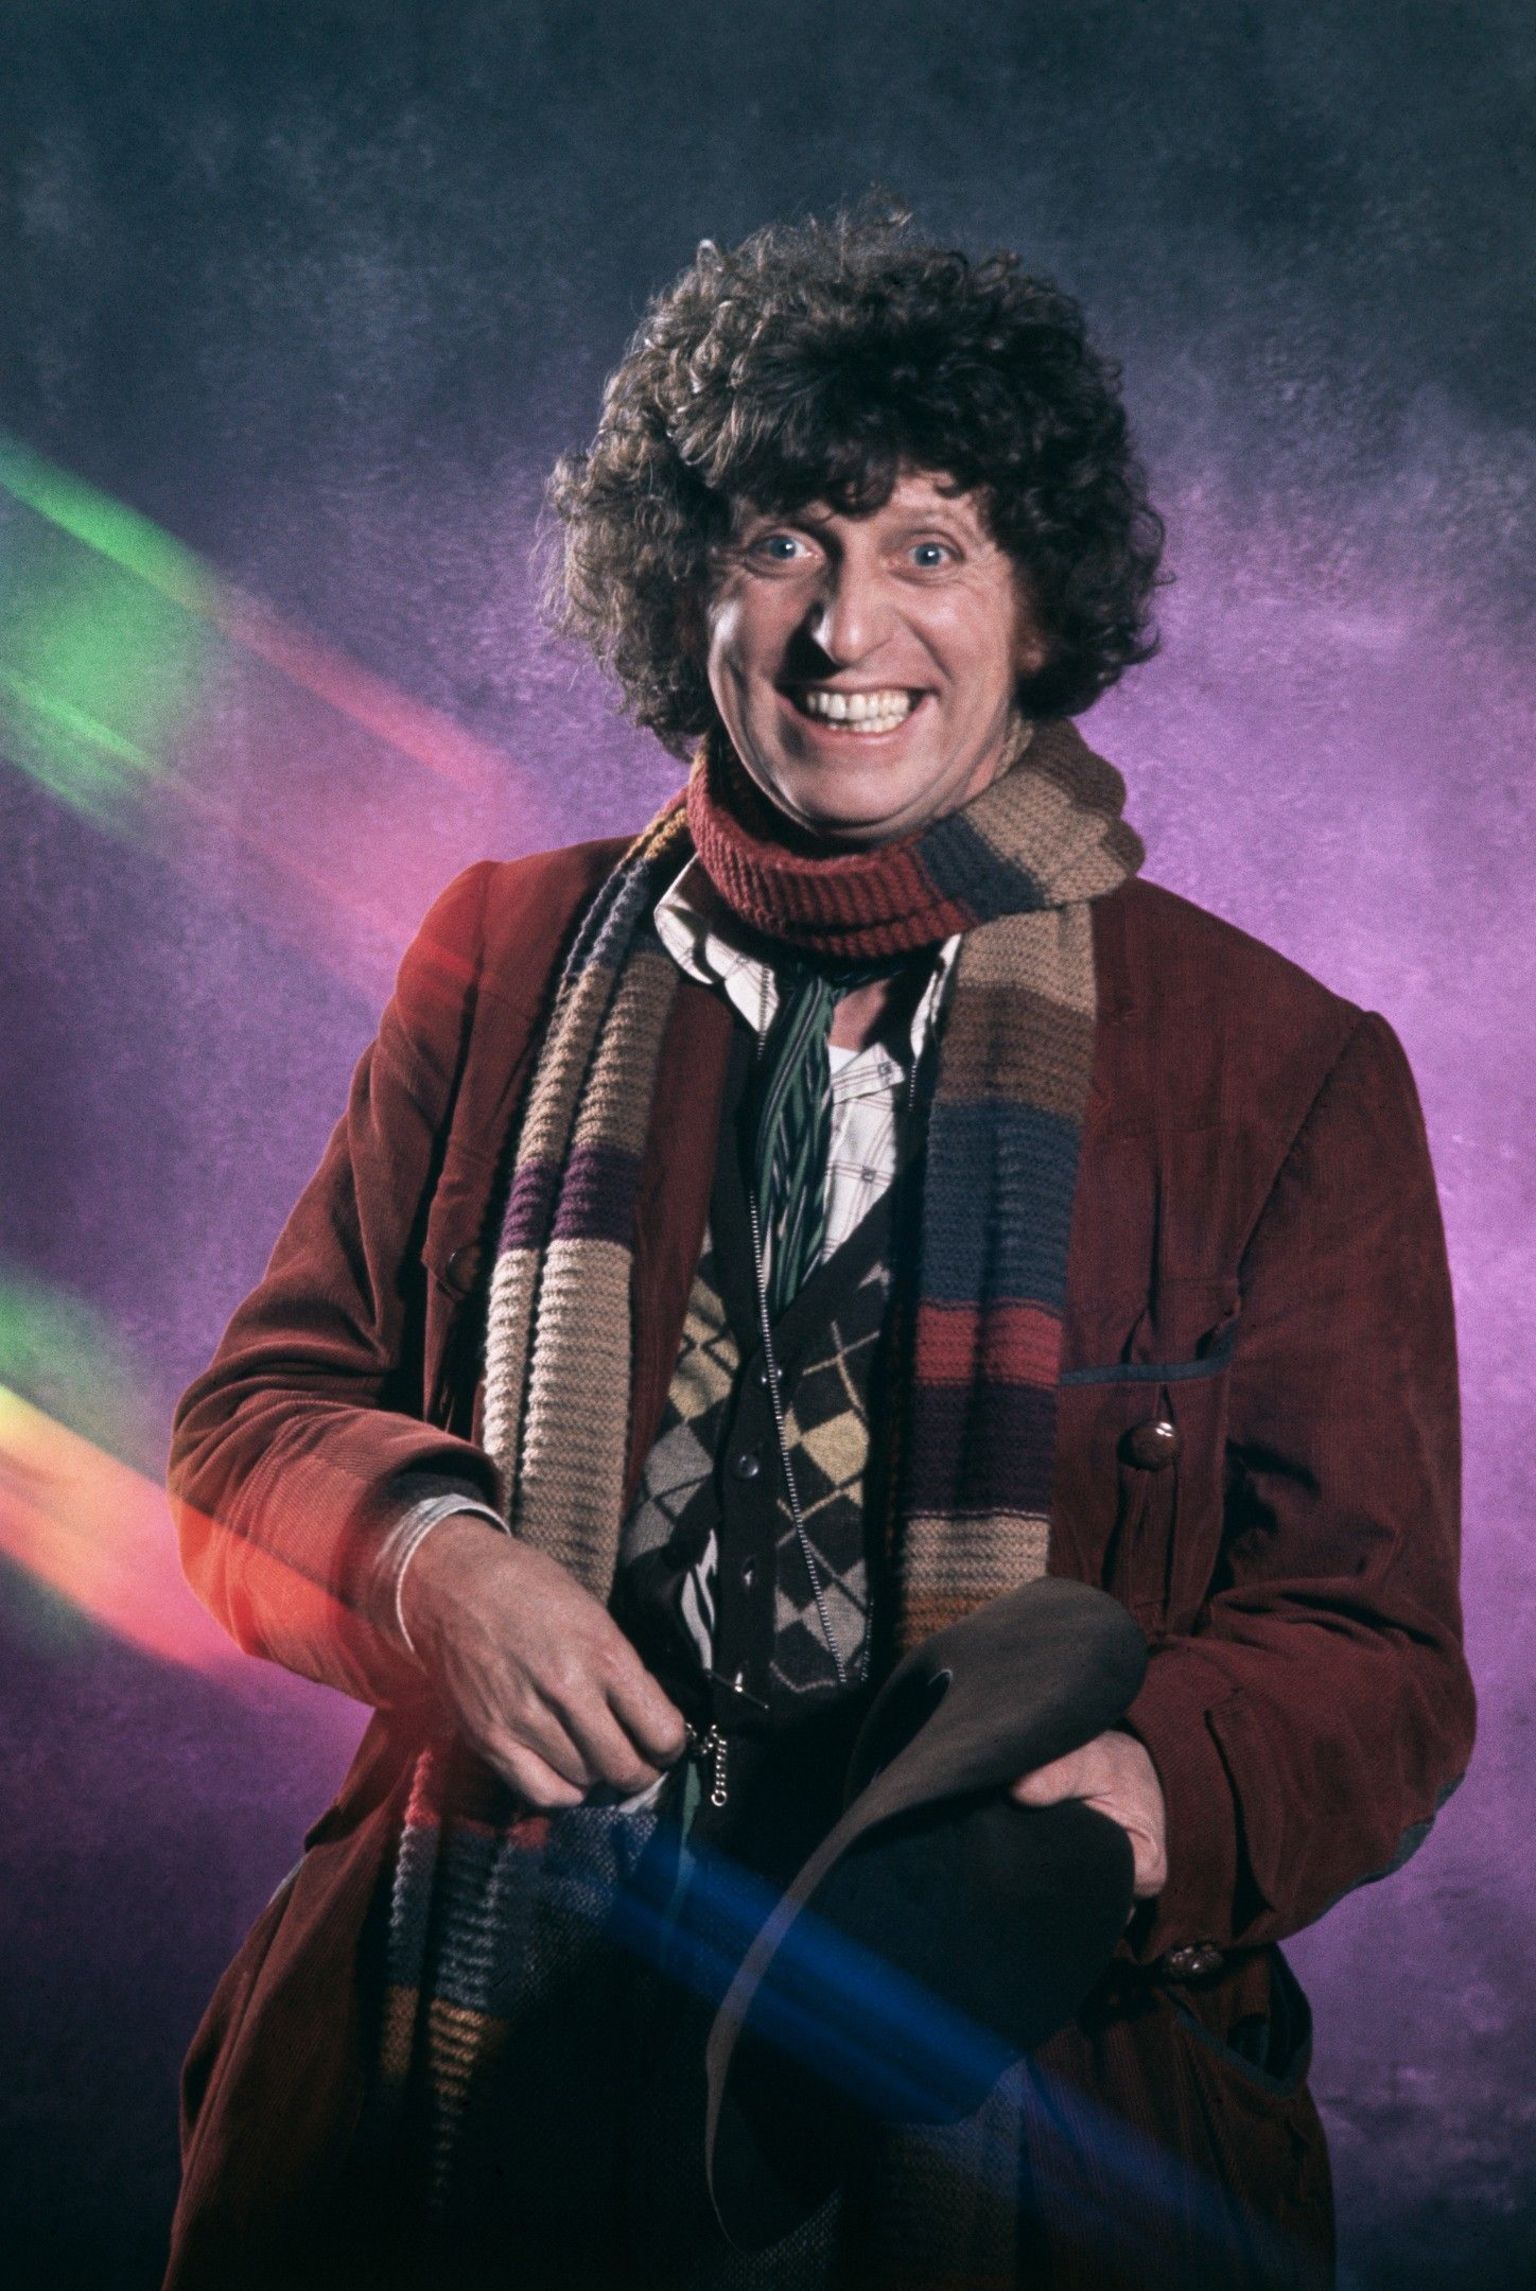 A smiling Tom Baker in costume as the 4th Doctor